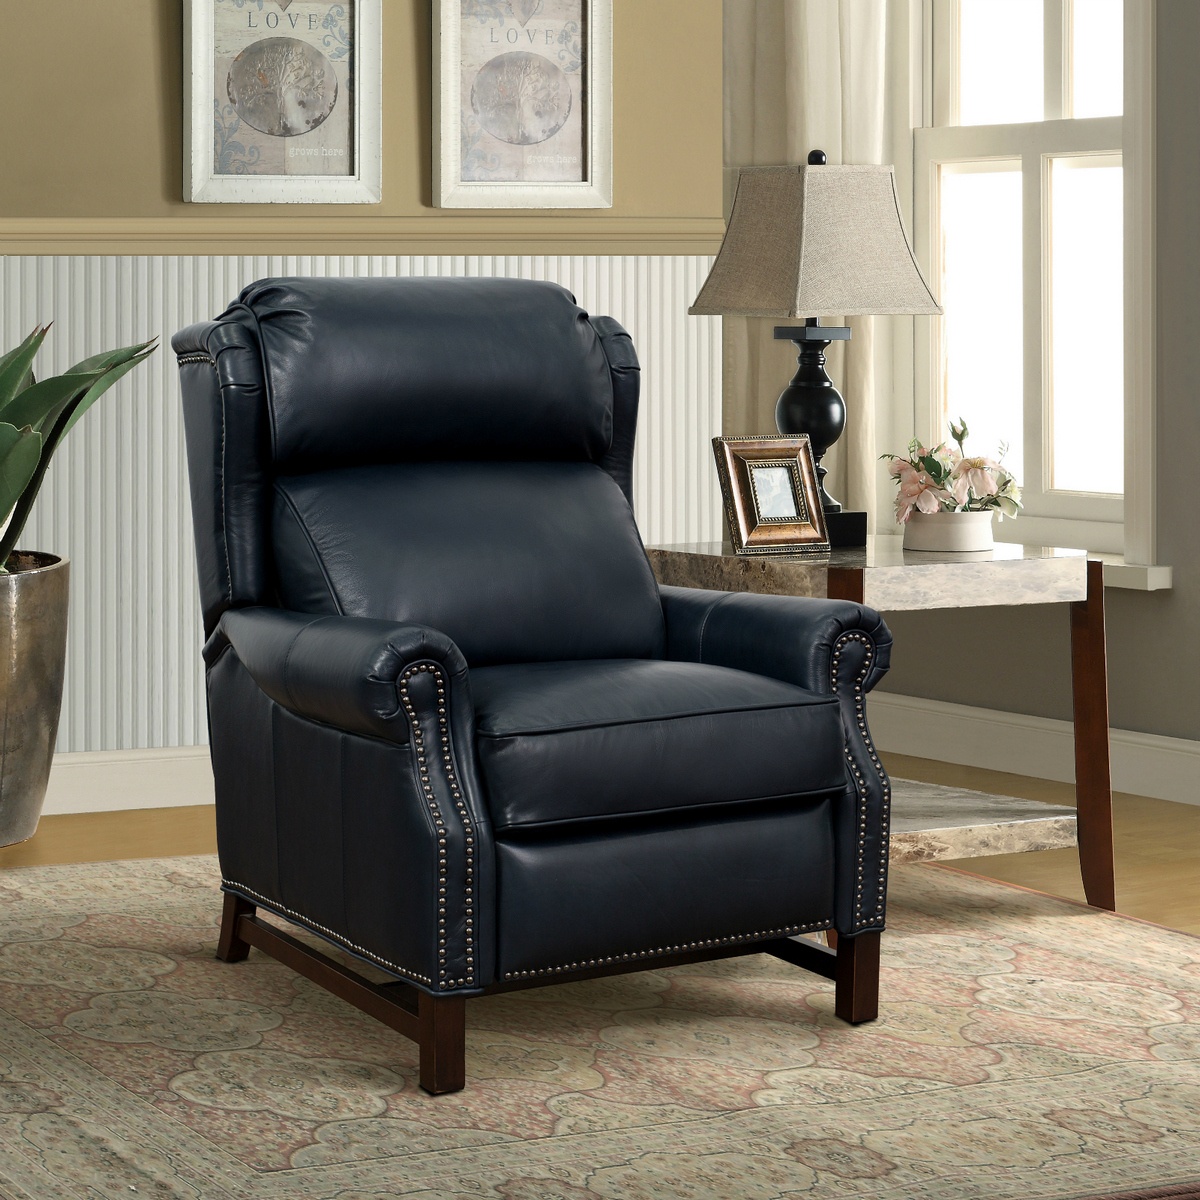 Recliner Leather Barcalounger